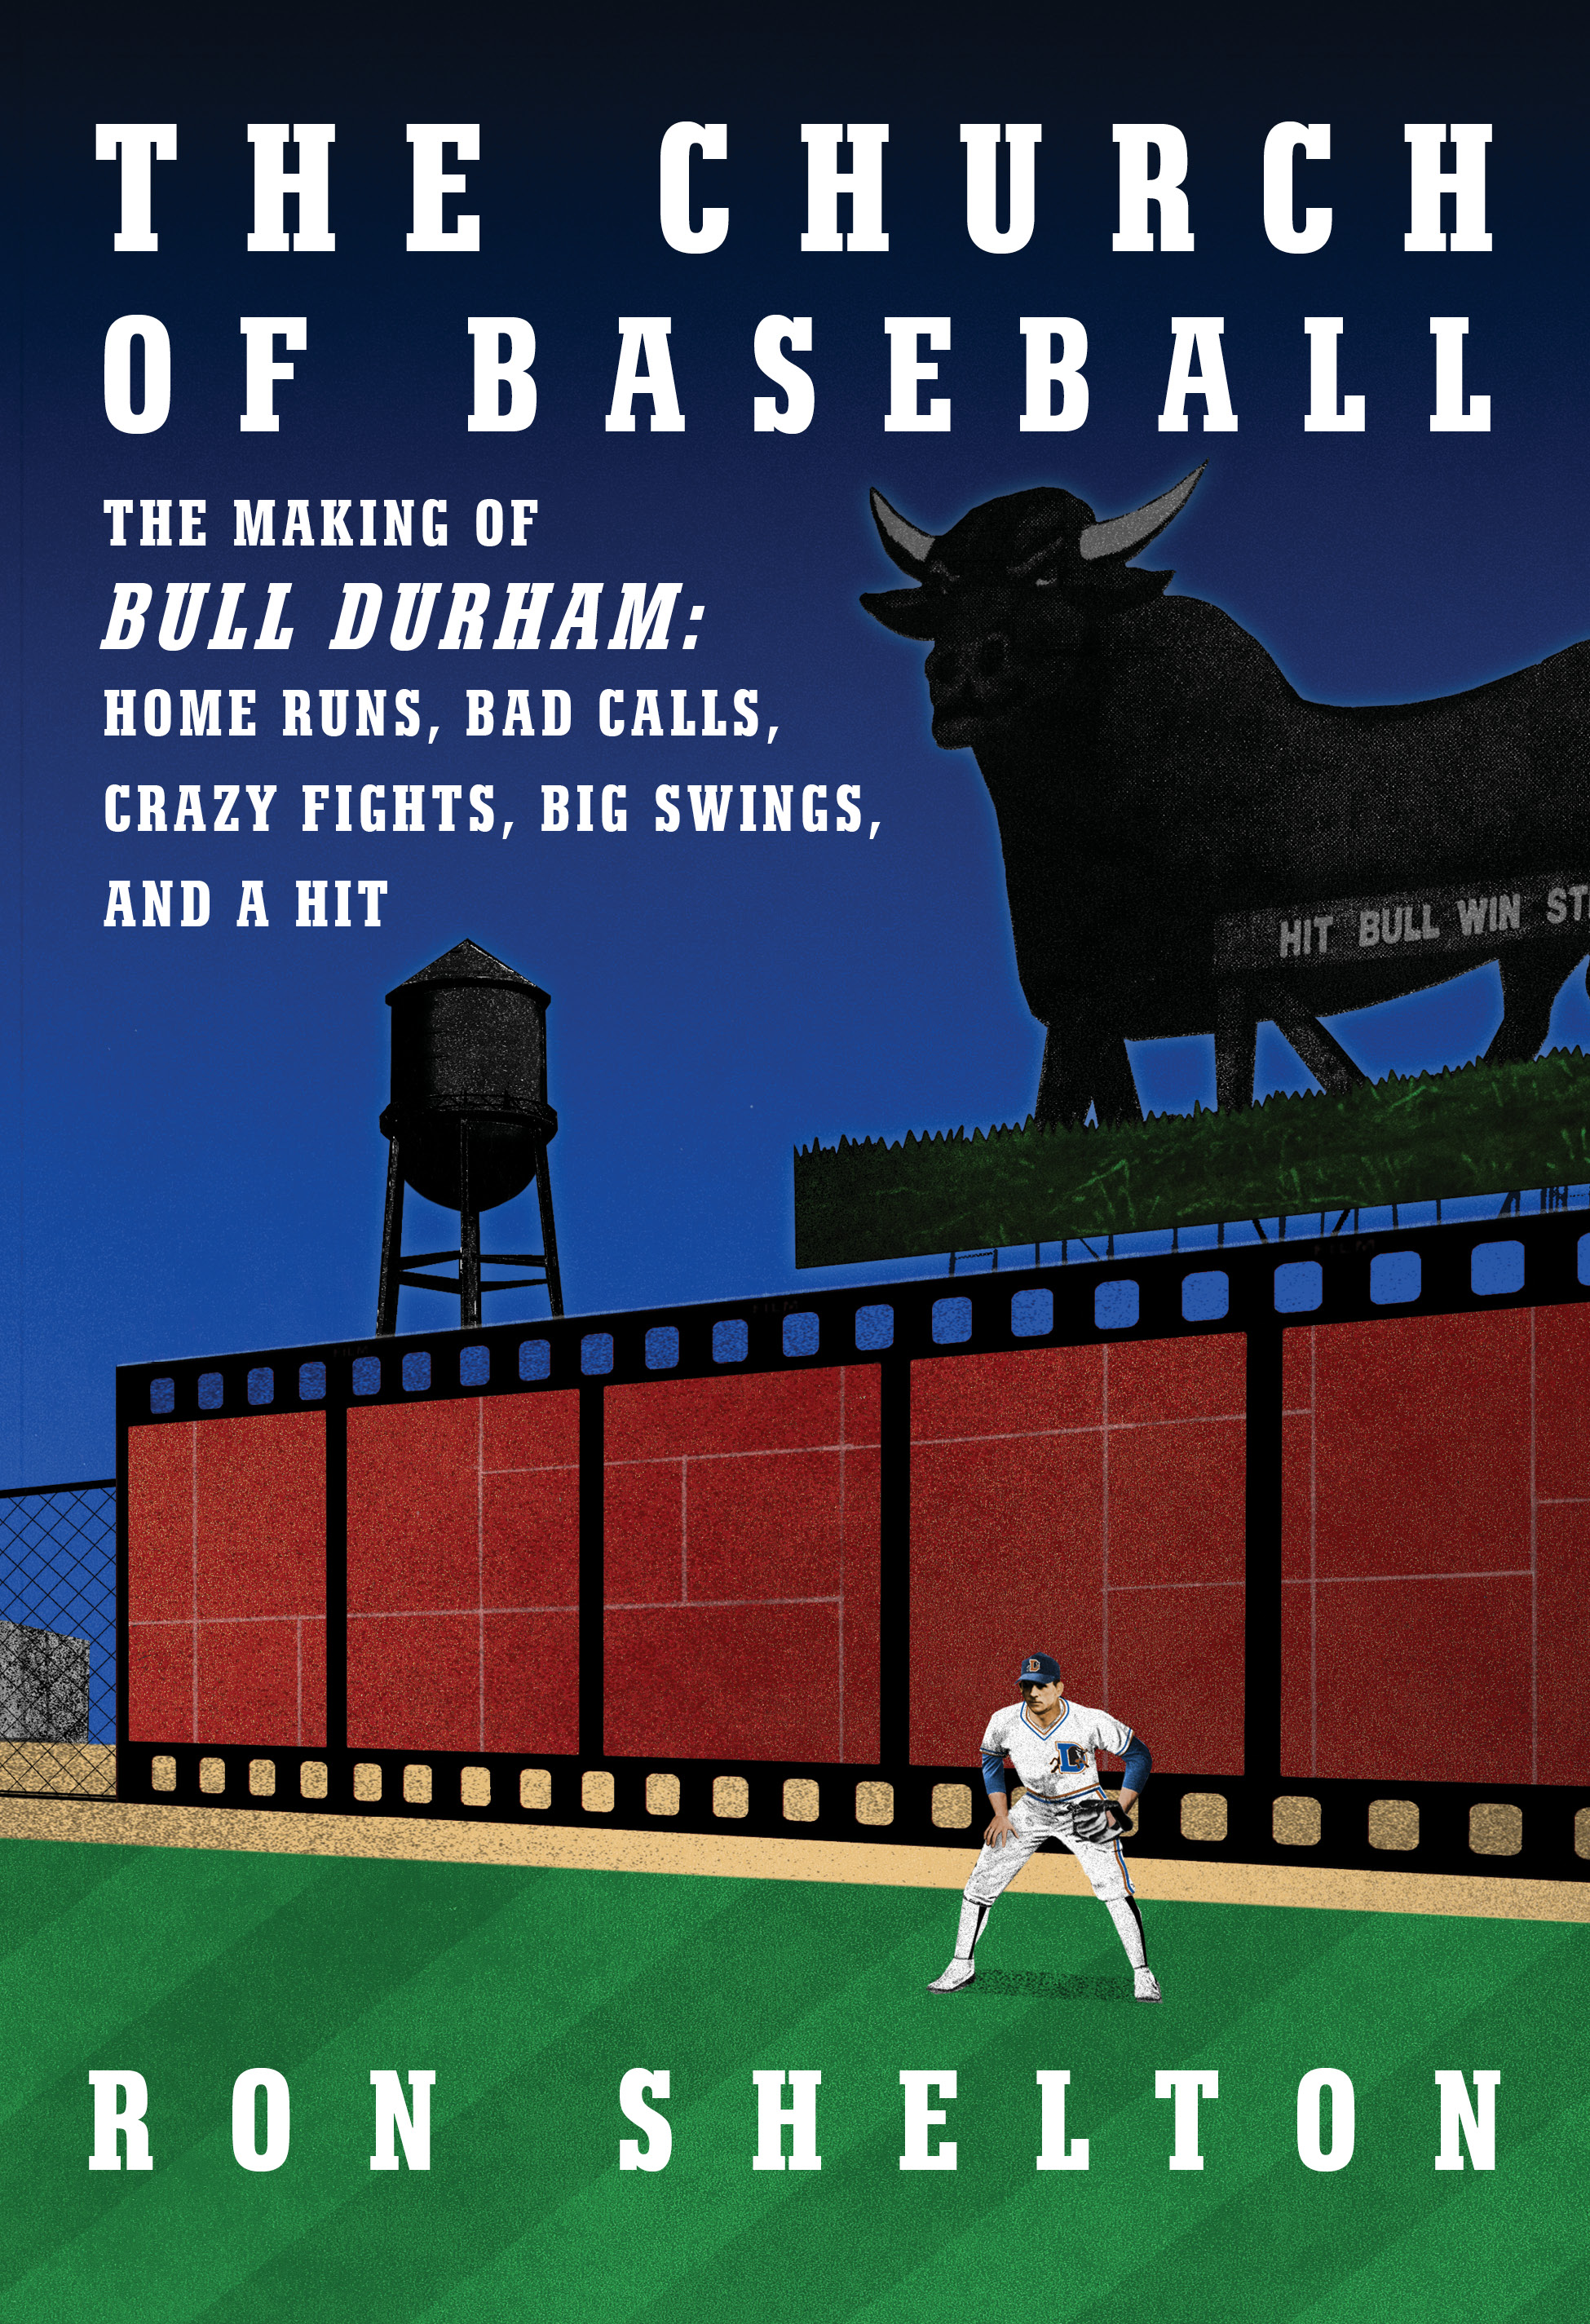 Jacket Cover for THE CHURCH OF BASEBALL by Ron Shelton